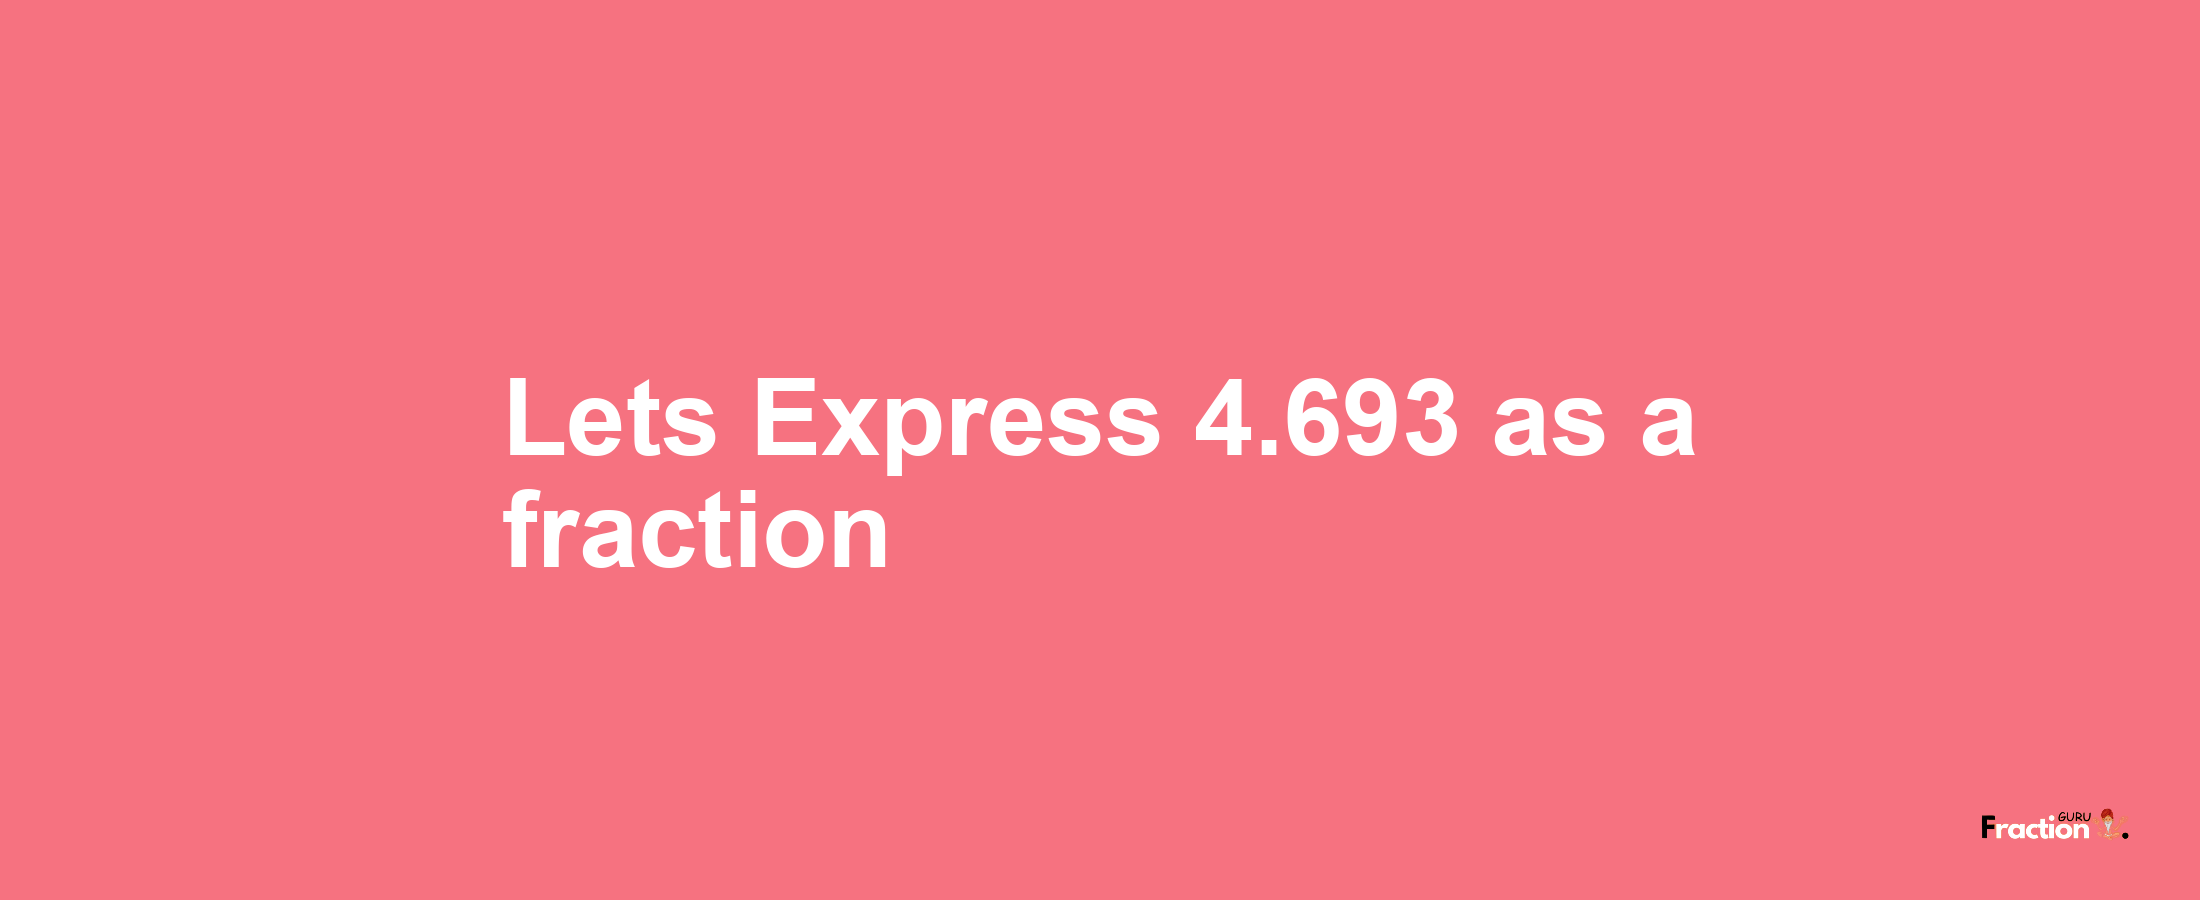 Lets Express 4.693 as afraction